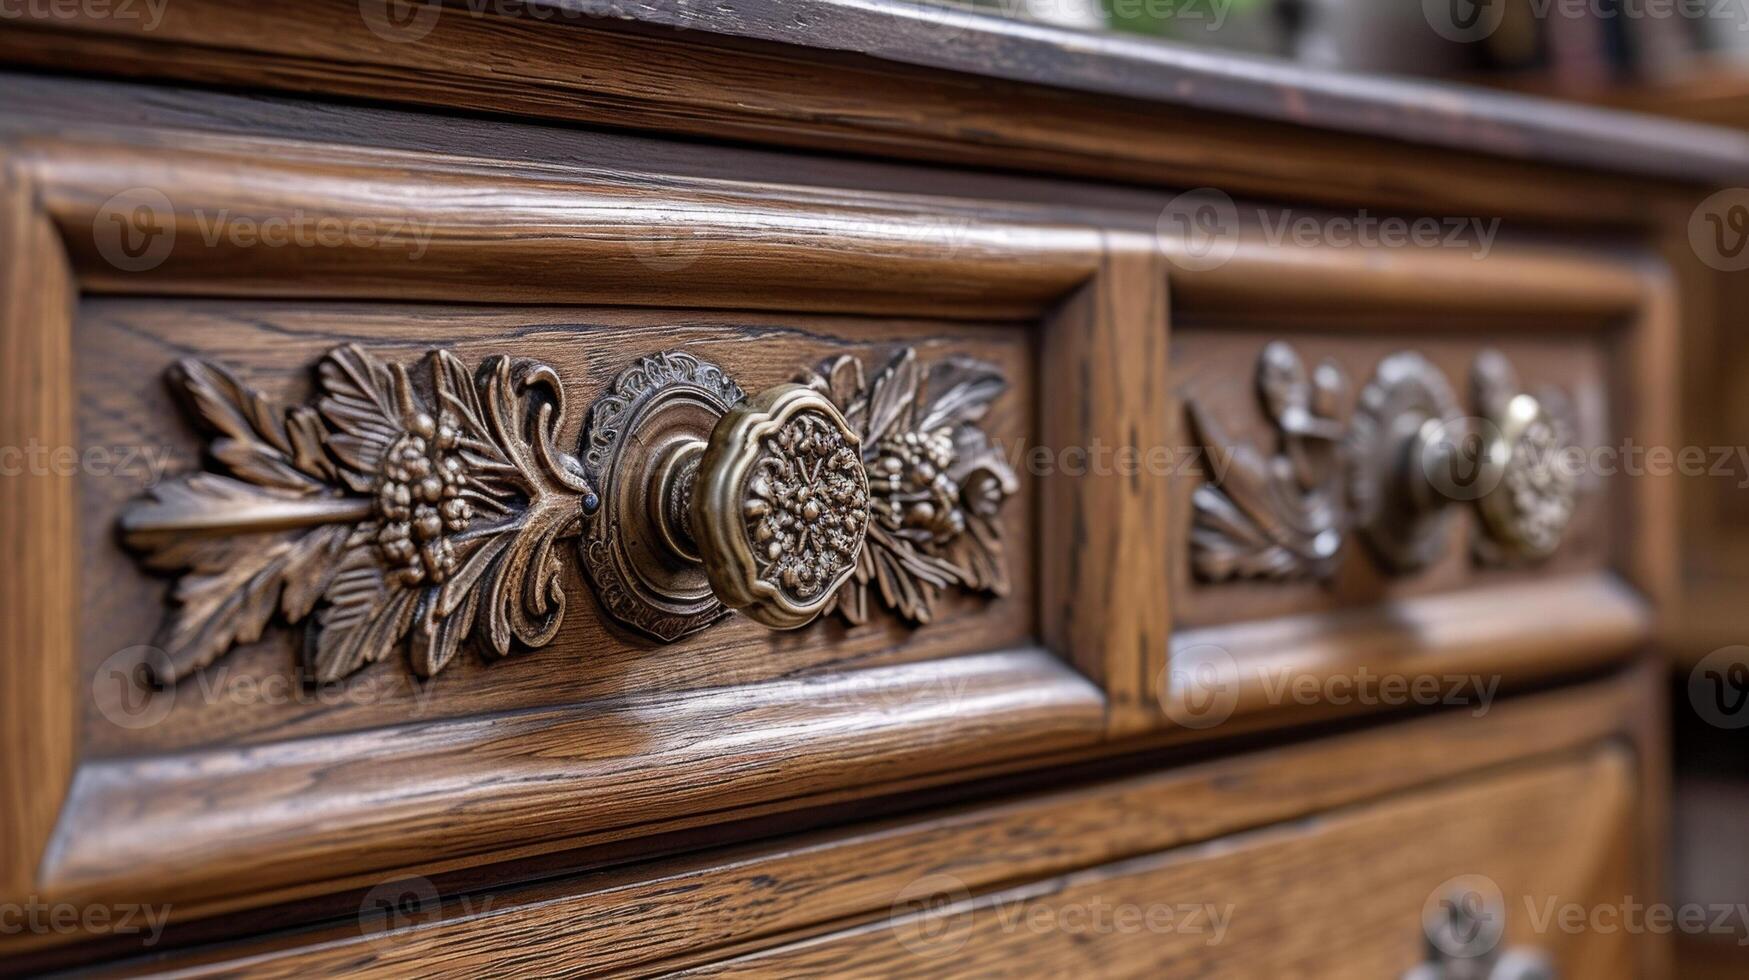 A set of br cabinet pulls once dull and faded now polished to a brilliant shine and beautifully adorning a restored antique dresser photo